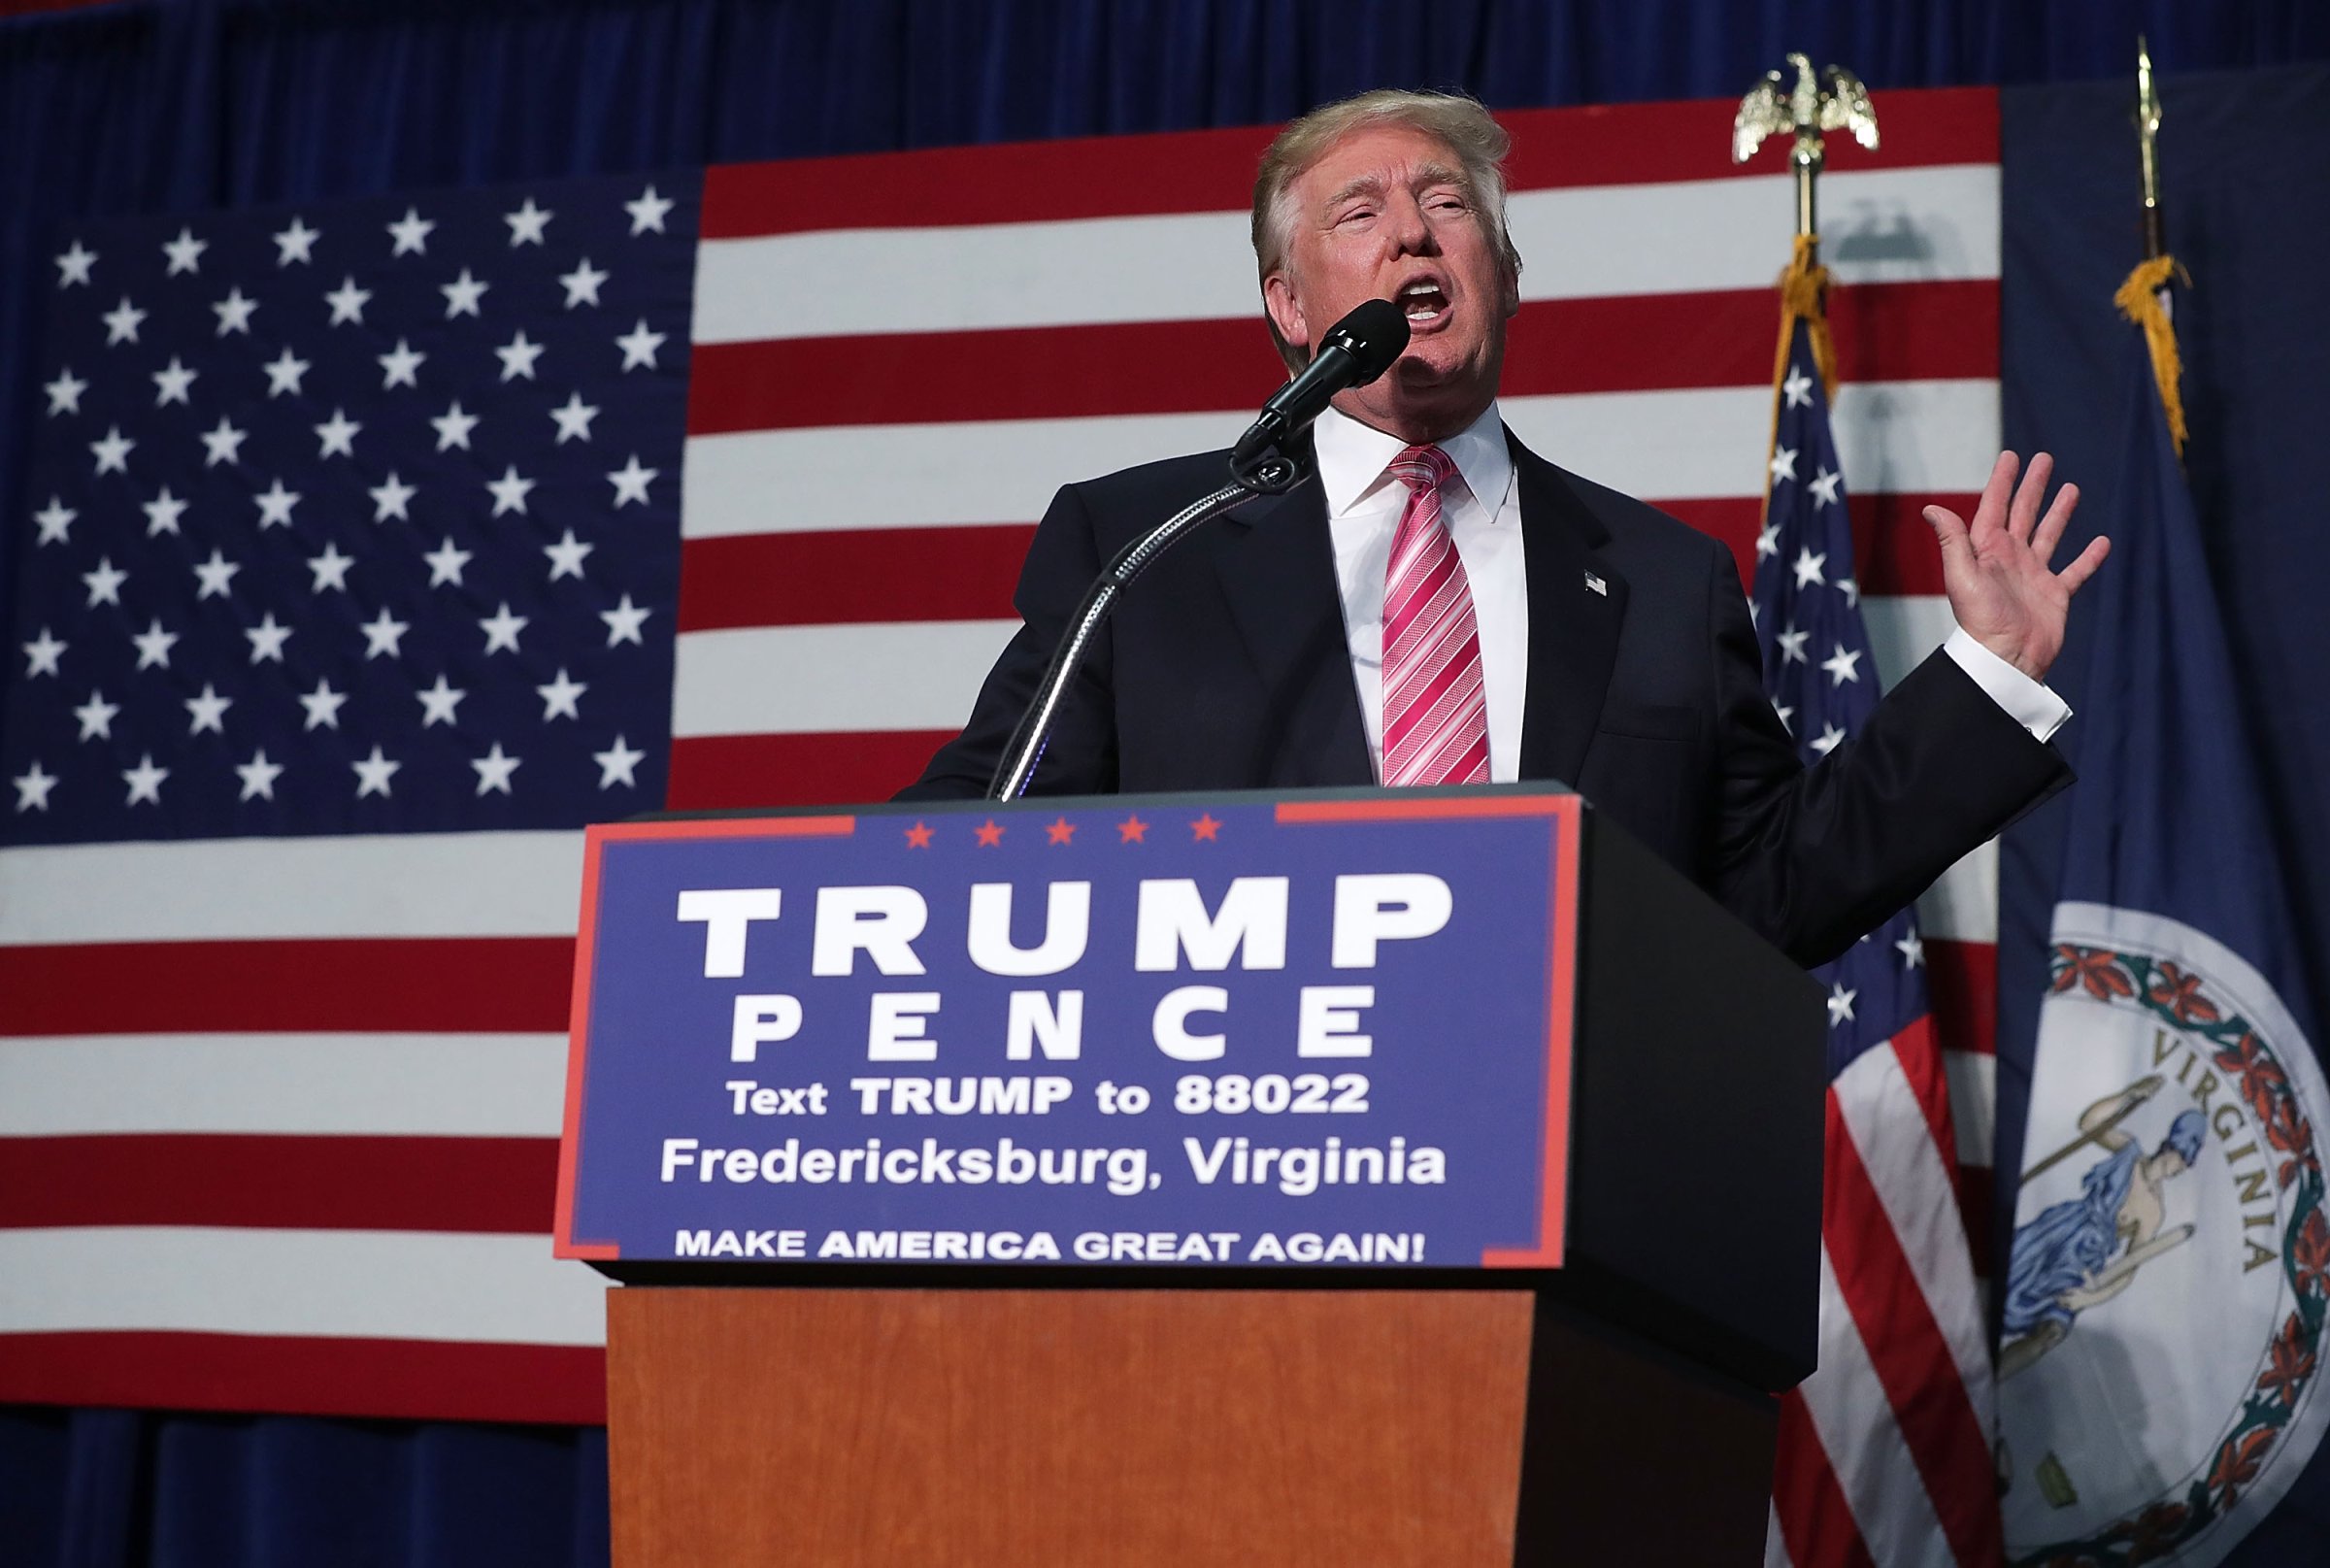 Donald Trump speaks to voters during a campaign rally, on Aug. 20, 2016 in Fredericksburg, Va.